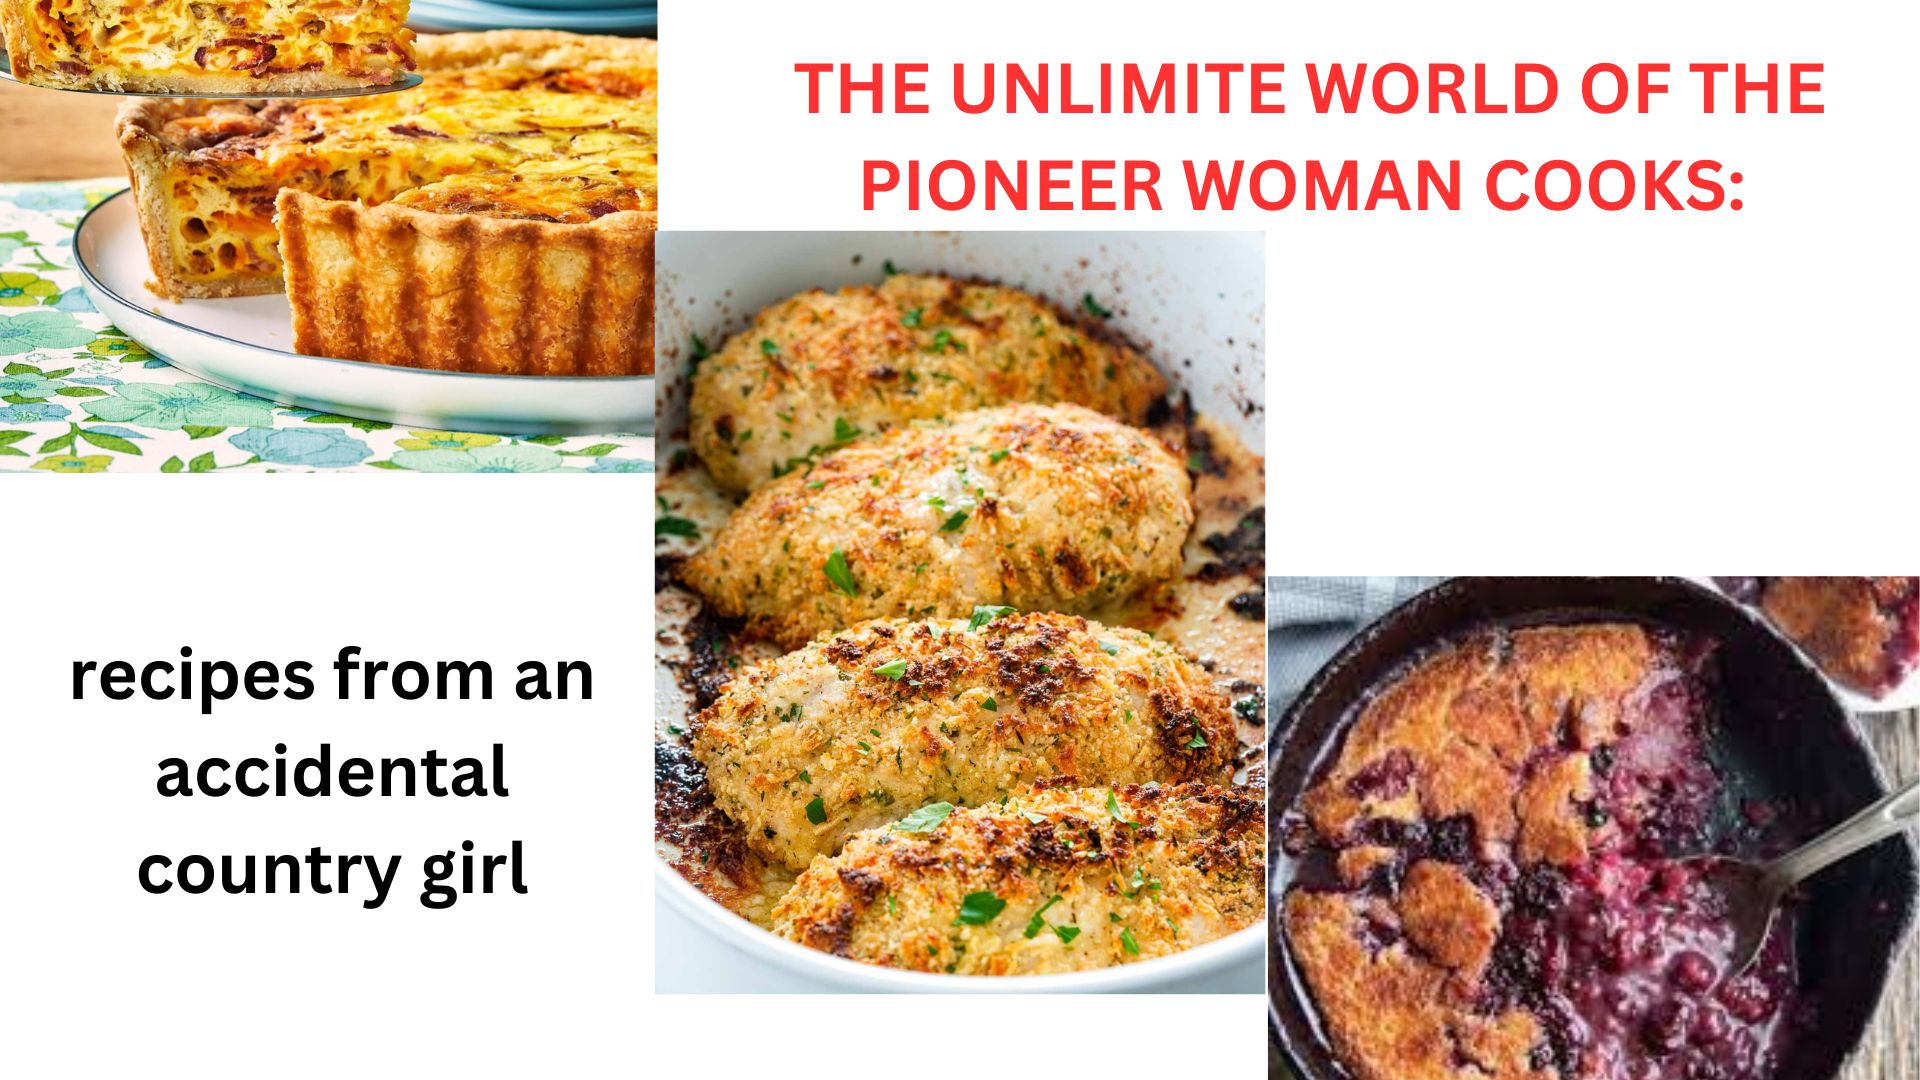 Exploring the unlimite World of the pioneer woman cooks: recipes from an accidental country girl